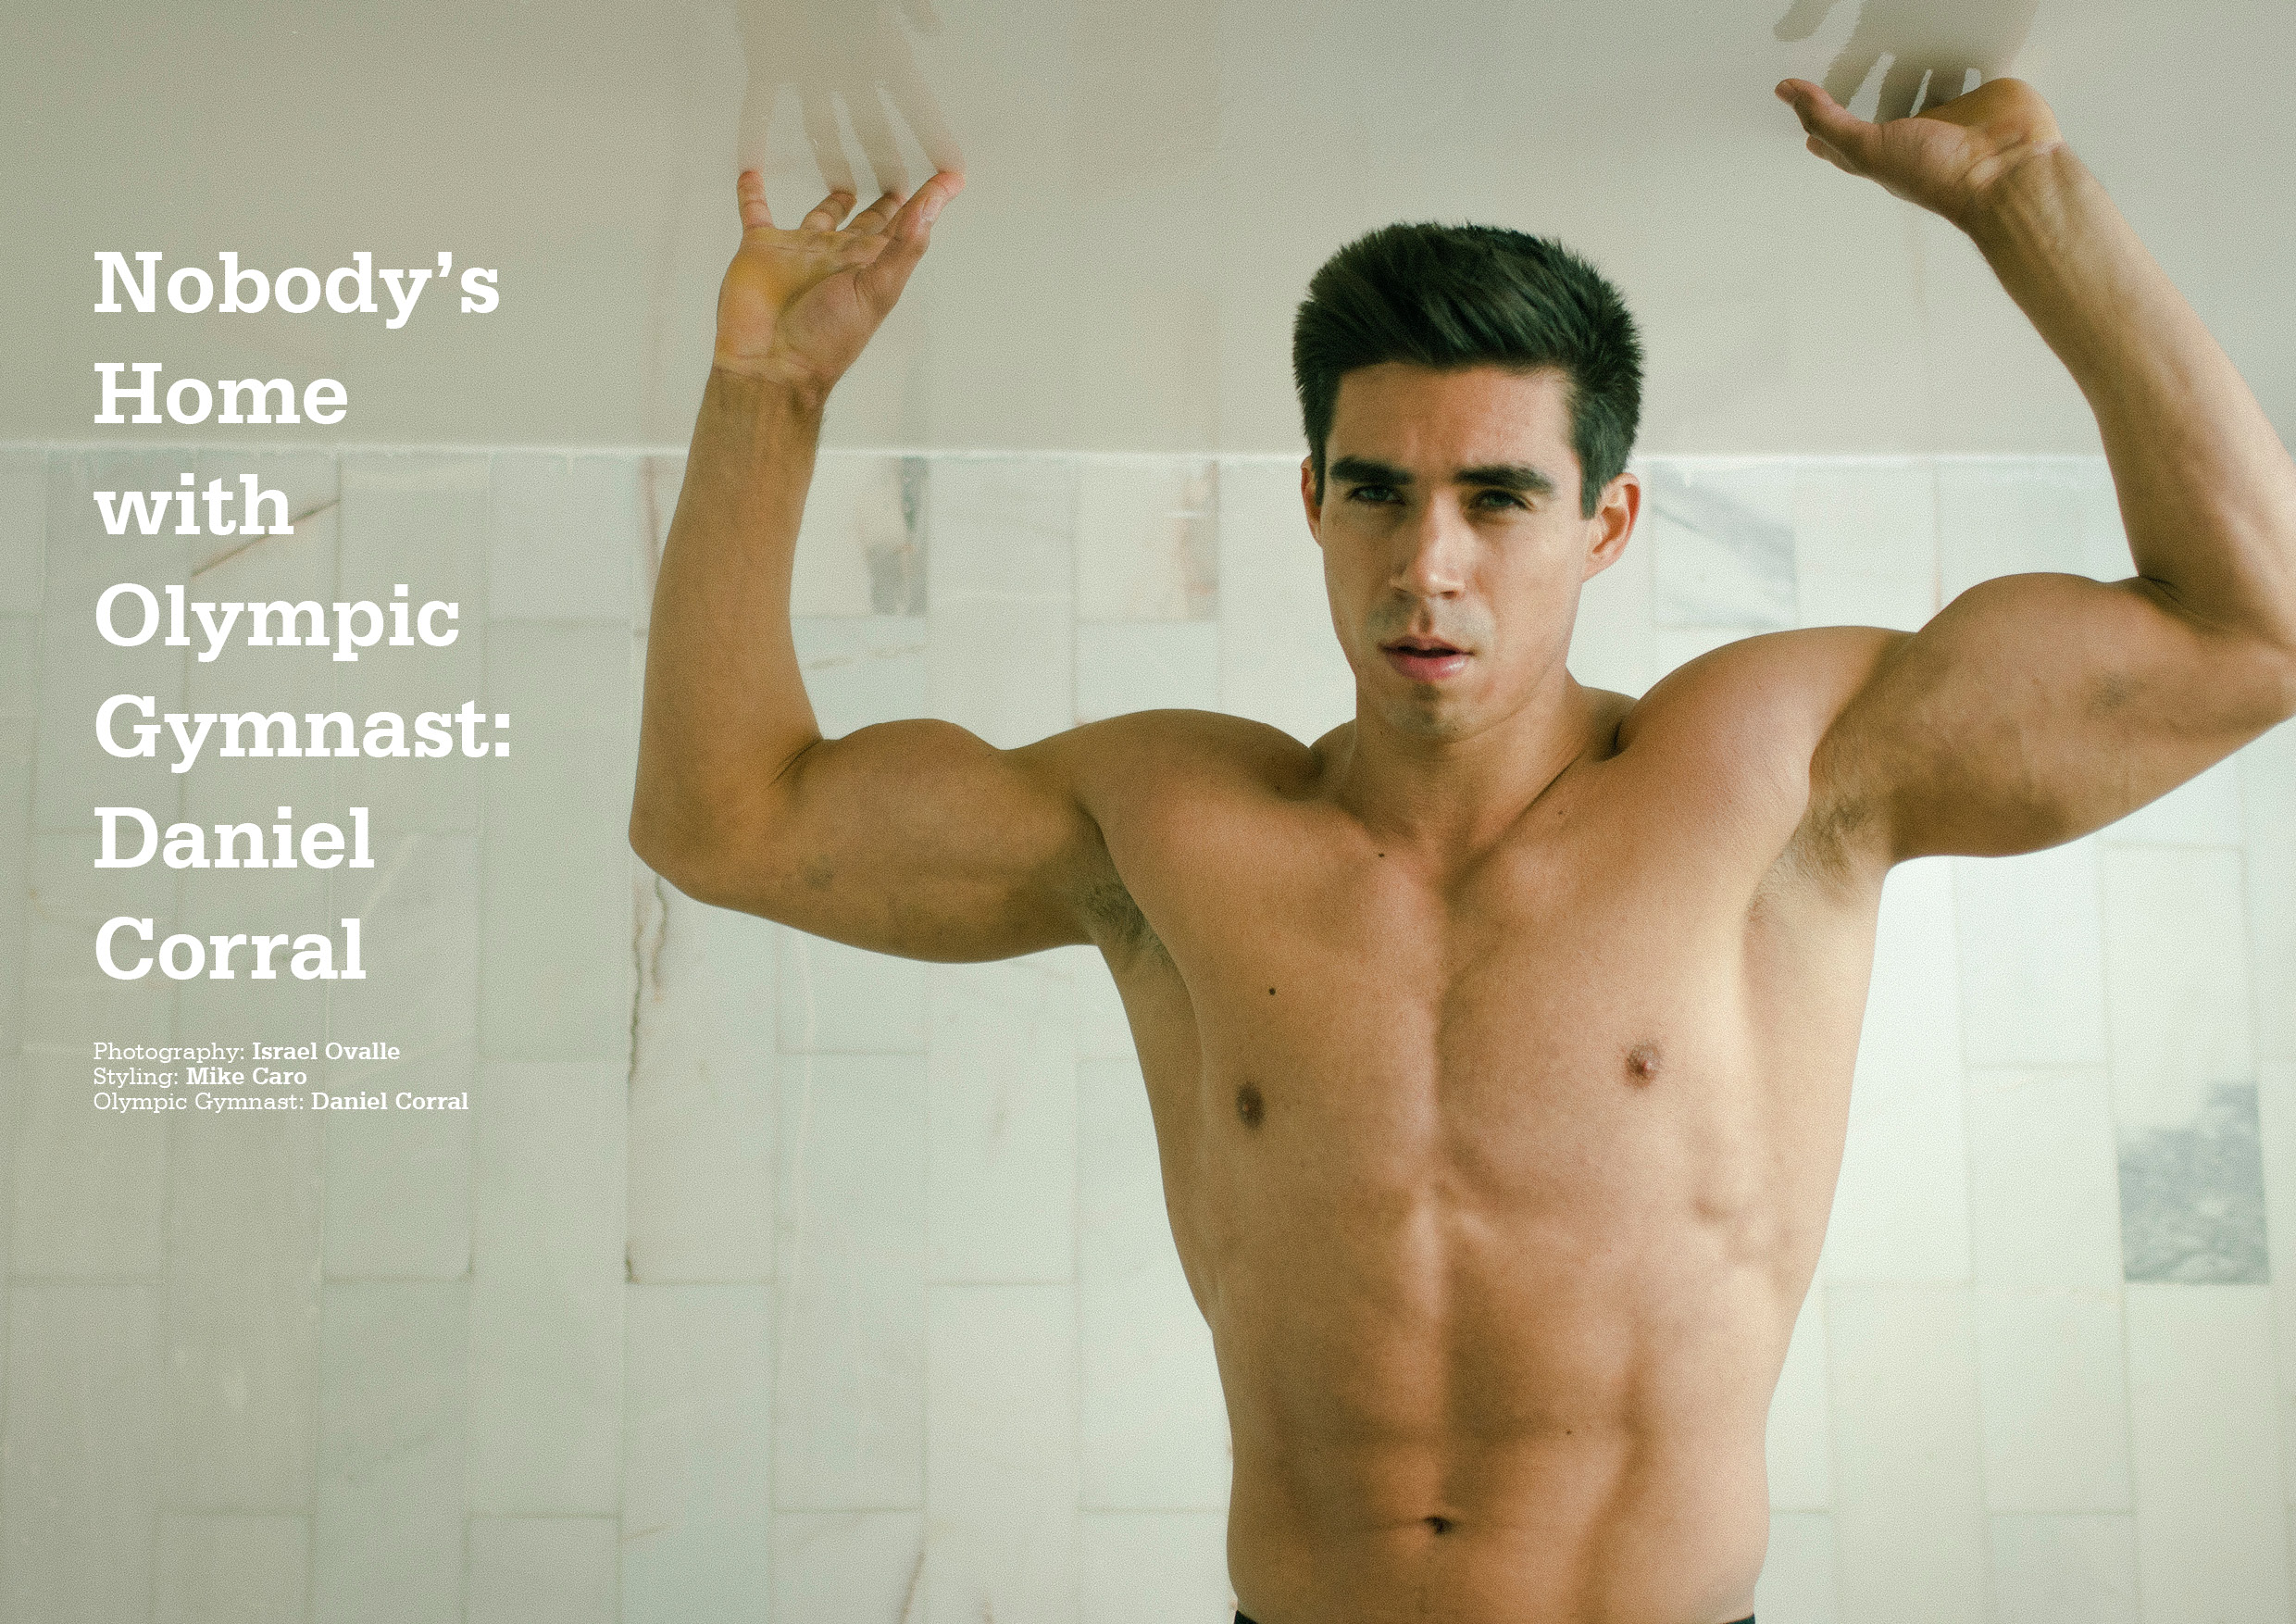 Olympic Gymnast Daniel Corral By Israel Ovalle For CLIENT Online Client Magazine